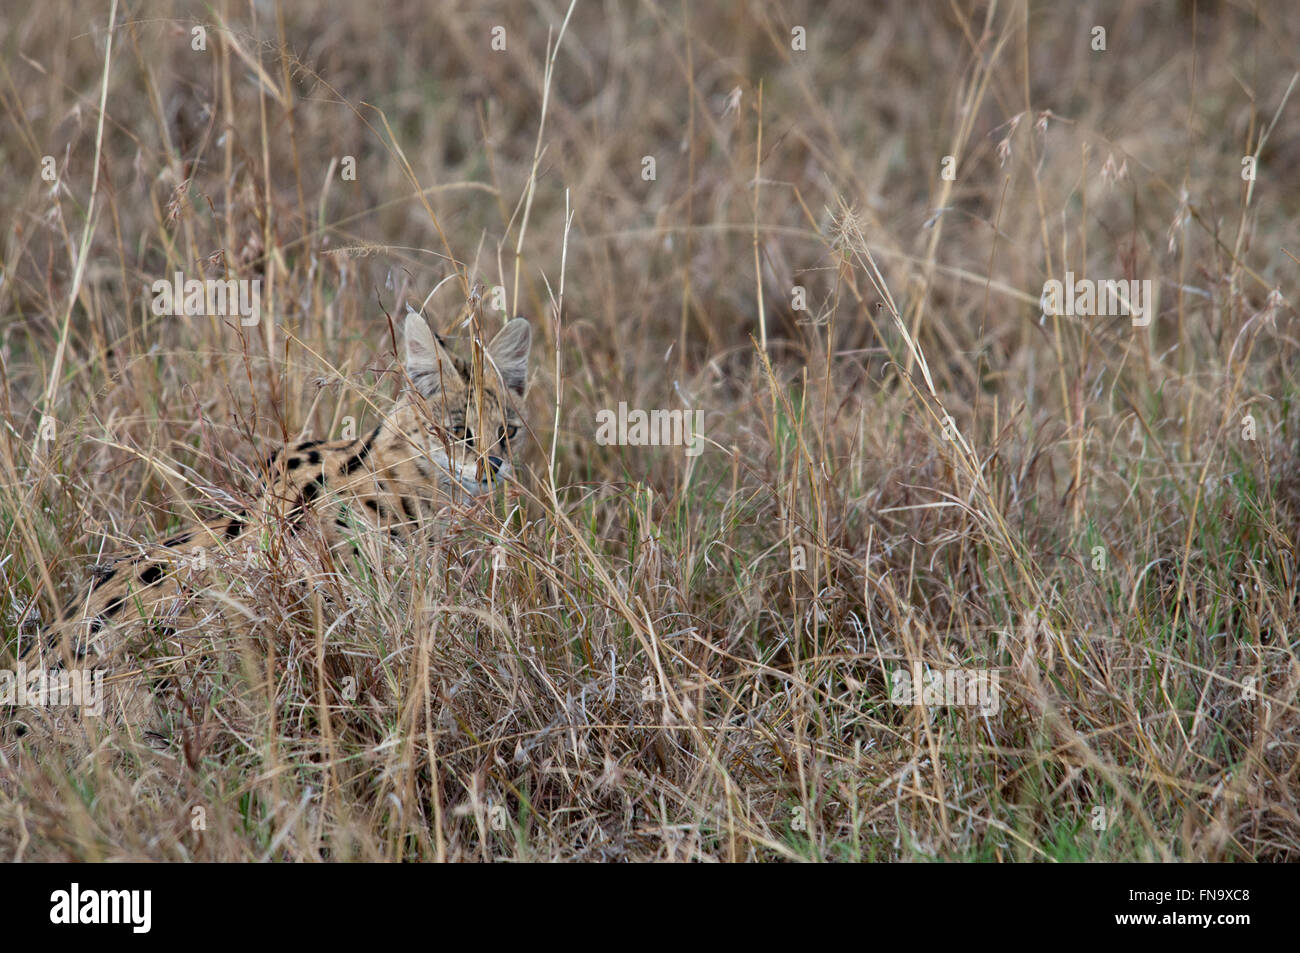 Solitary Serval Cat, Leptailurus serval, hidden in the dry grass in the Masai Mara National Reserve, Kenya, East Africa Stock Photo